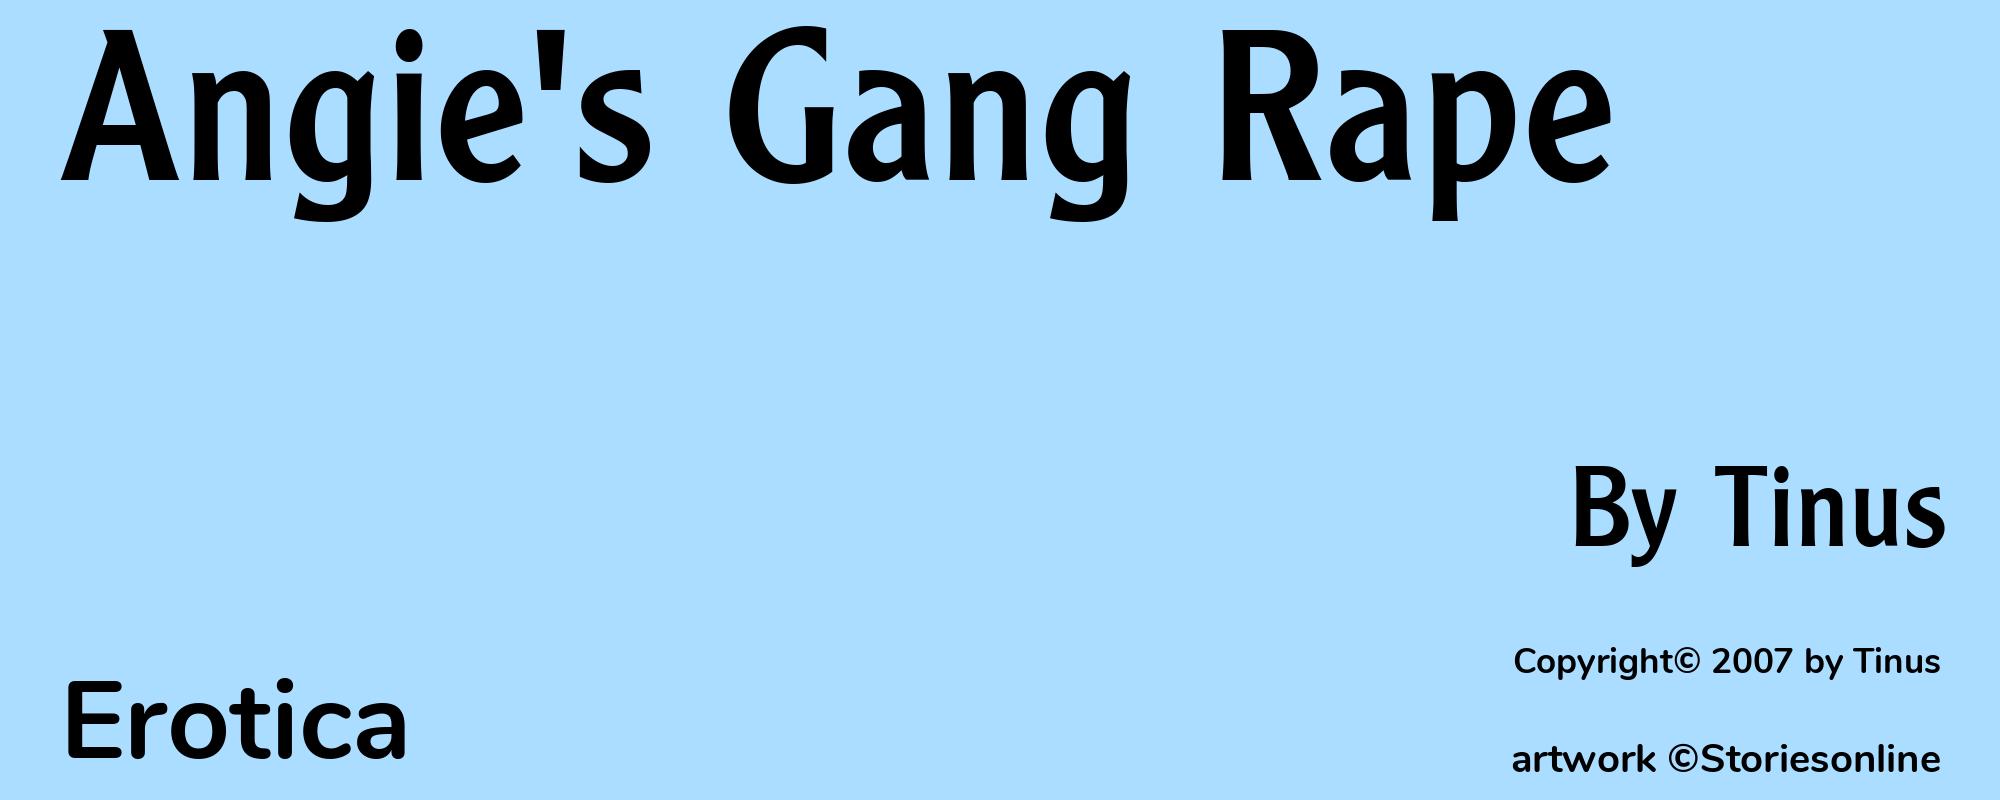 Angie's Gang Rape - Cover